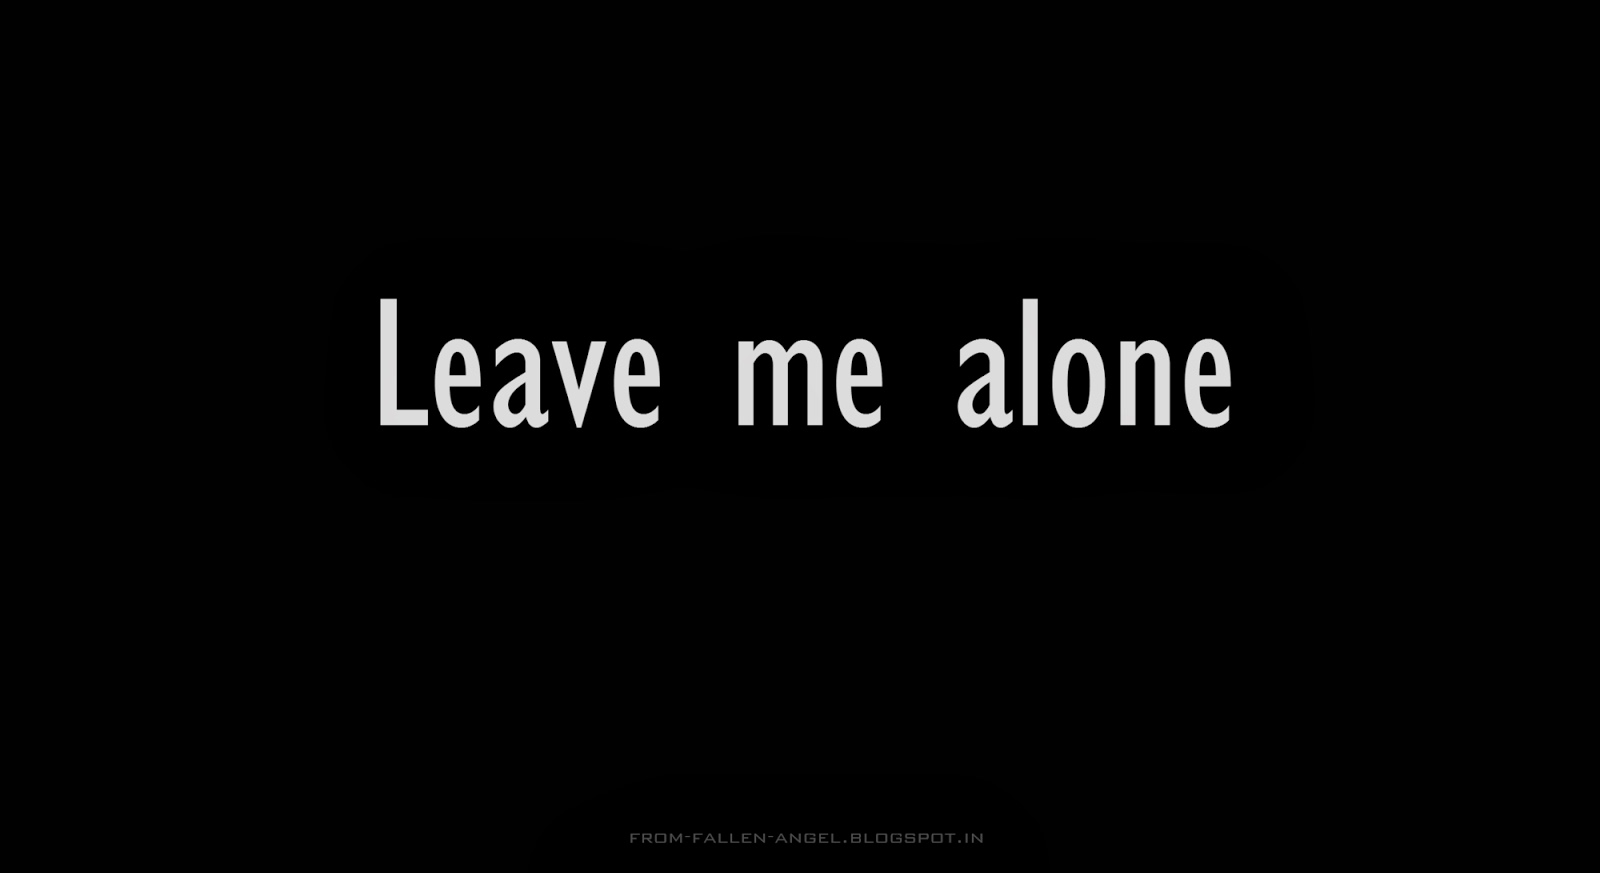 Funny Sayings To State Leave Me Alone - Leave Me Alone Quotes. 